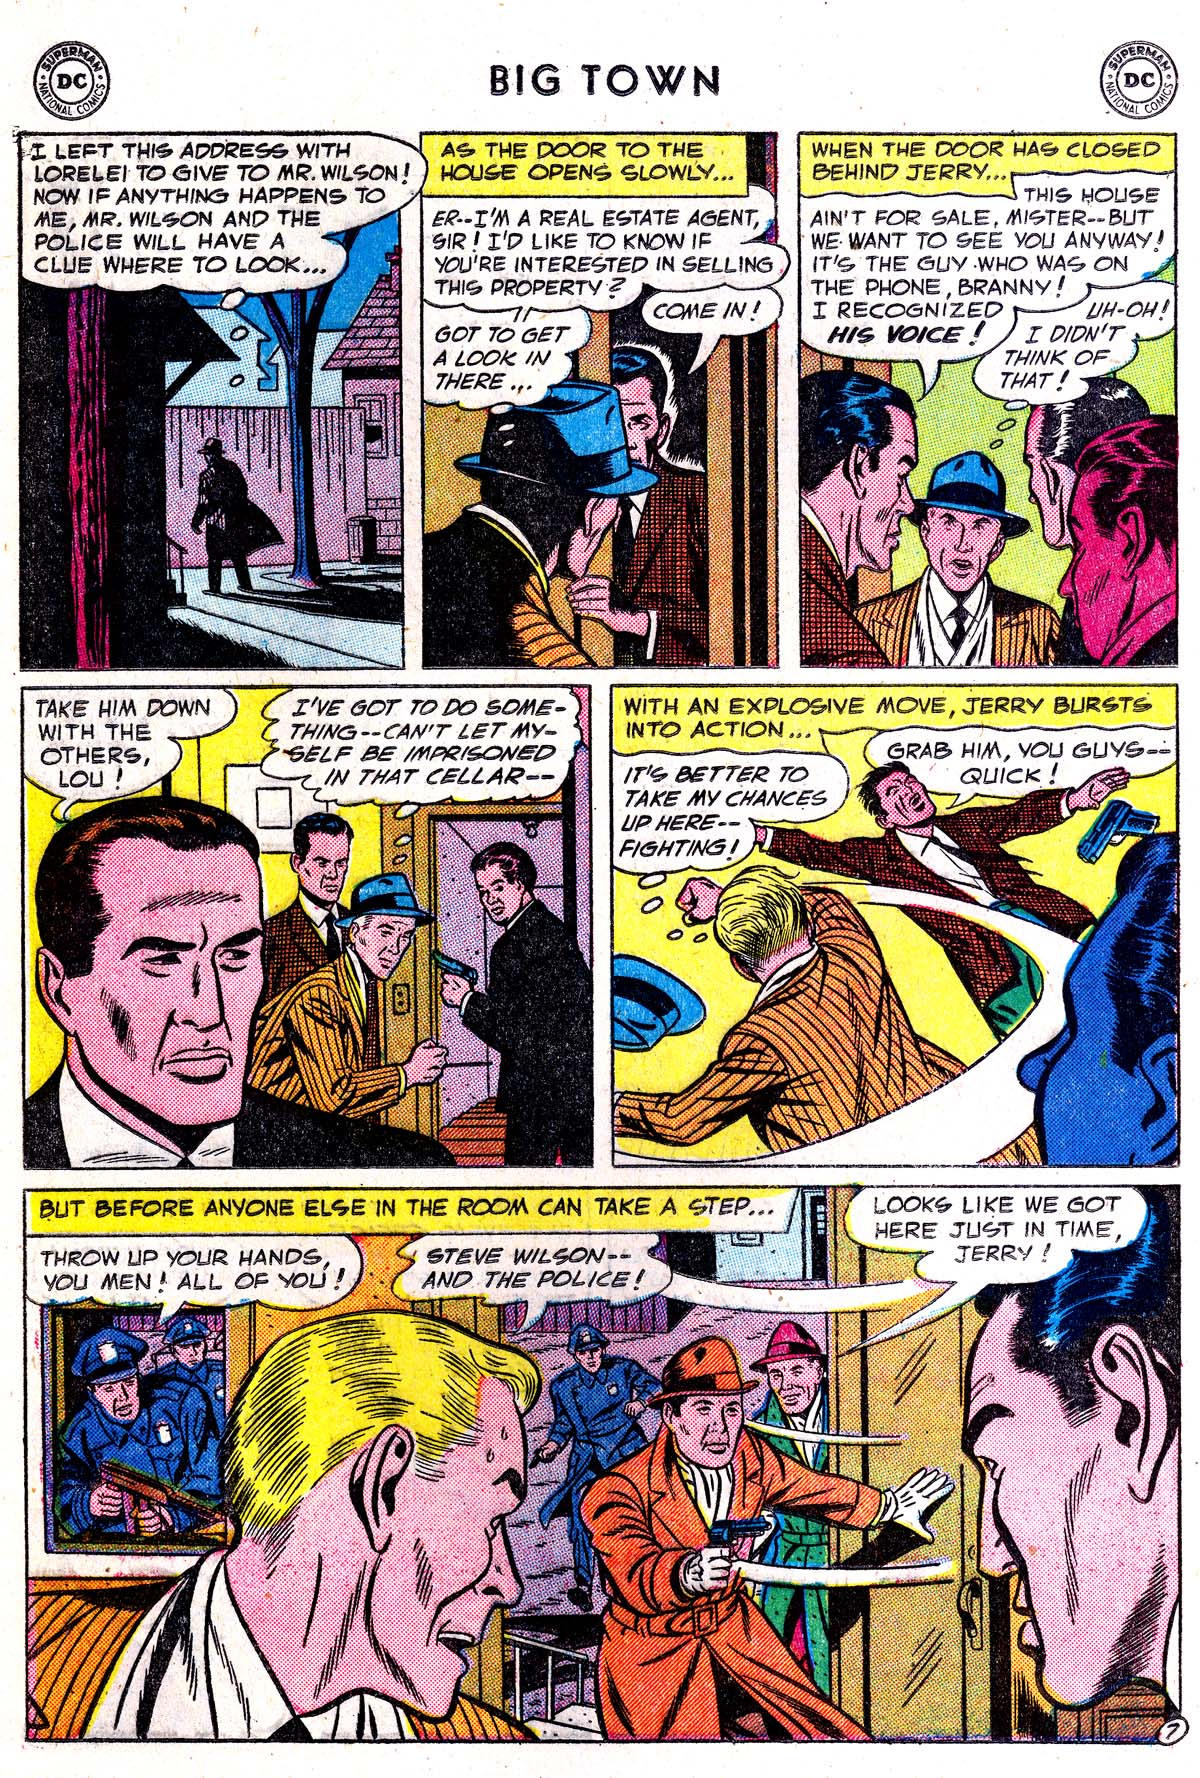 Big Town (1951) 38 Page 19